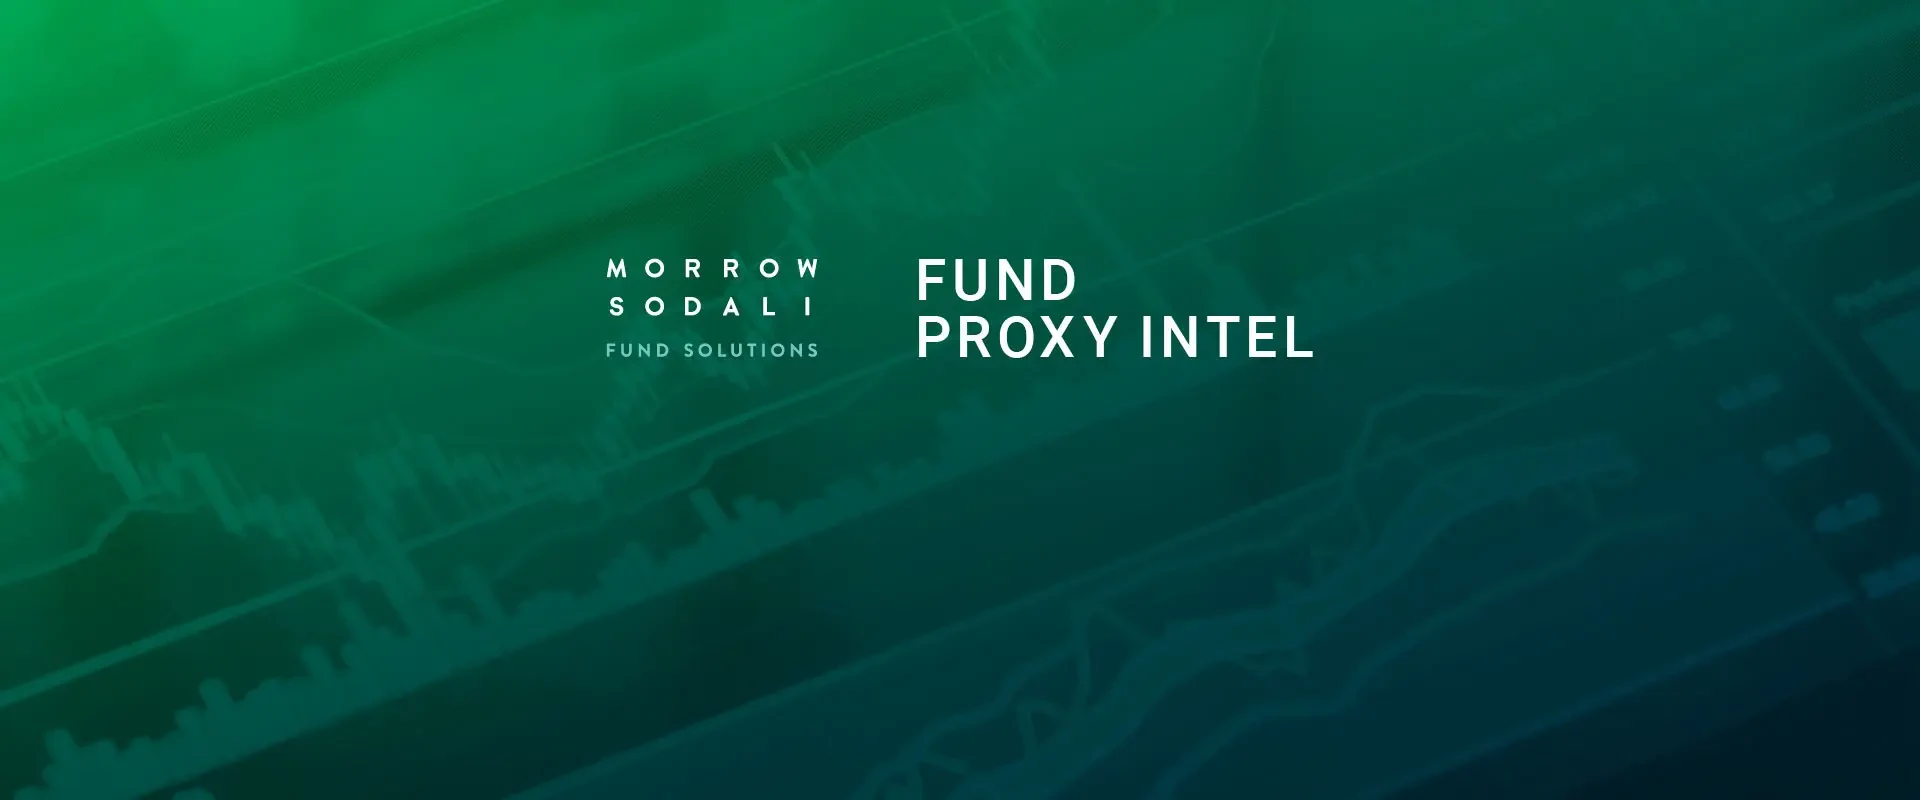 Fund Proxy Intel: Trends in Closed-End Fund Activism: Resetting the Baseline in 2022-2023